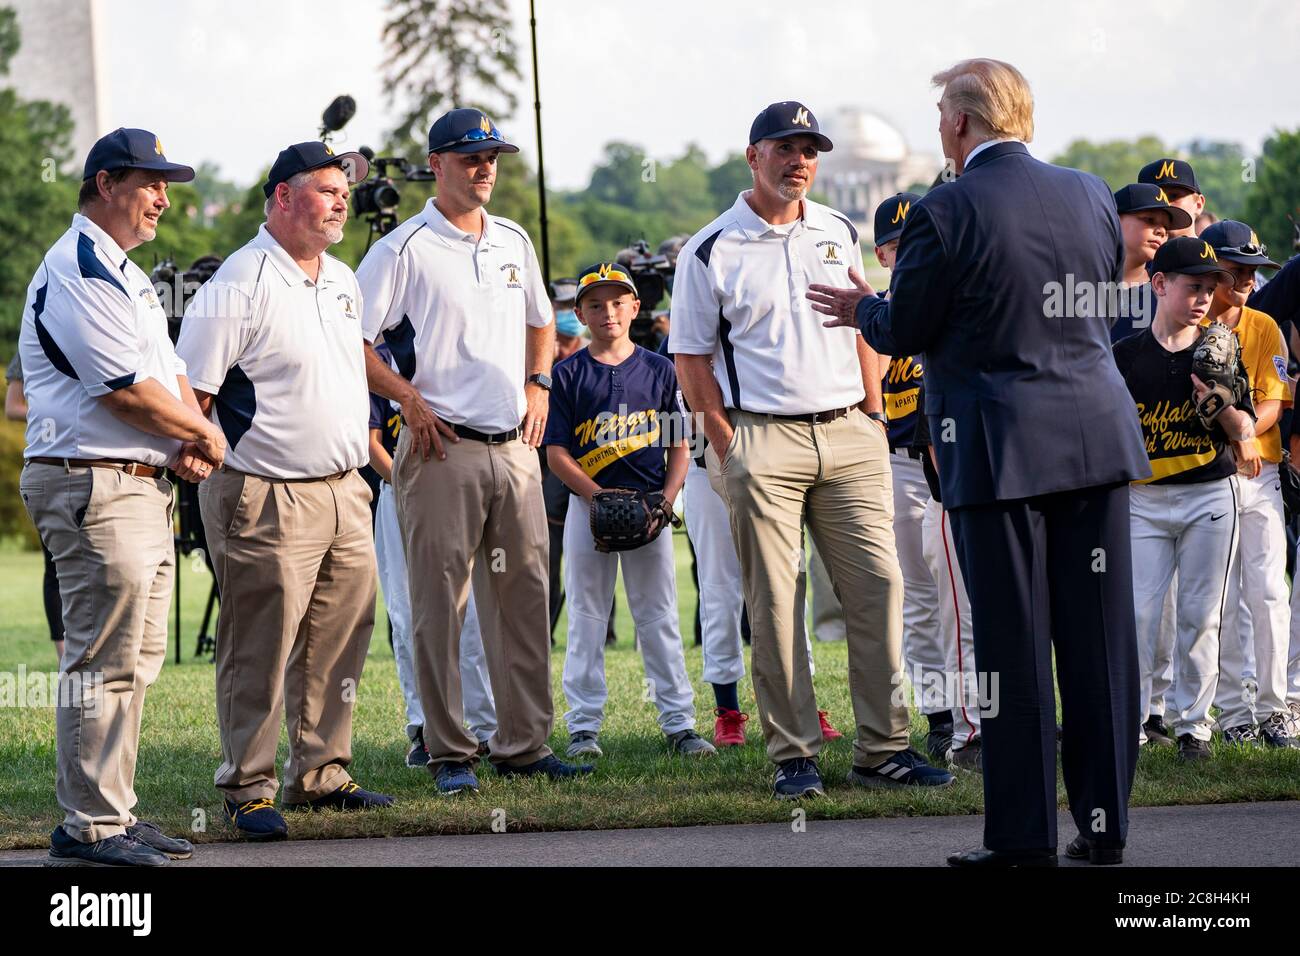 Washington, United States Of America. 23rd July, 2020. Washington, United States of America. 23 July, 2020. U.S. President Donald Trump chats with Little League players and coaches during a celebration to mark the opening day of Major League baseball on the South Lawn of the White House July 23, 2020 in Washington, DC The baseball season normally begins in the spring but was delayed due to the pandemic. Credit: Shealah Craighead/White House Photo/Alamy Live News Stock Photo